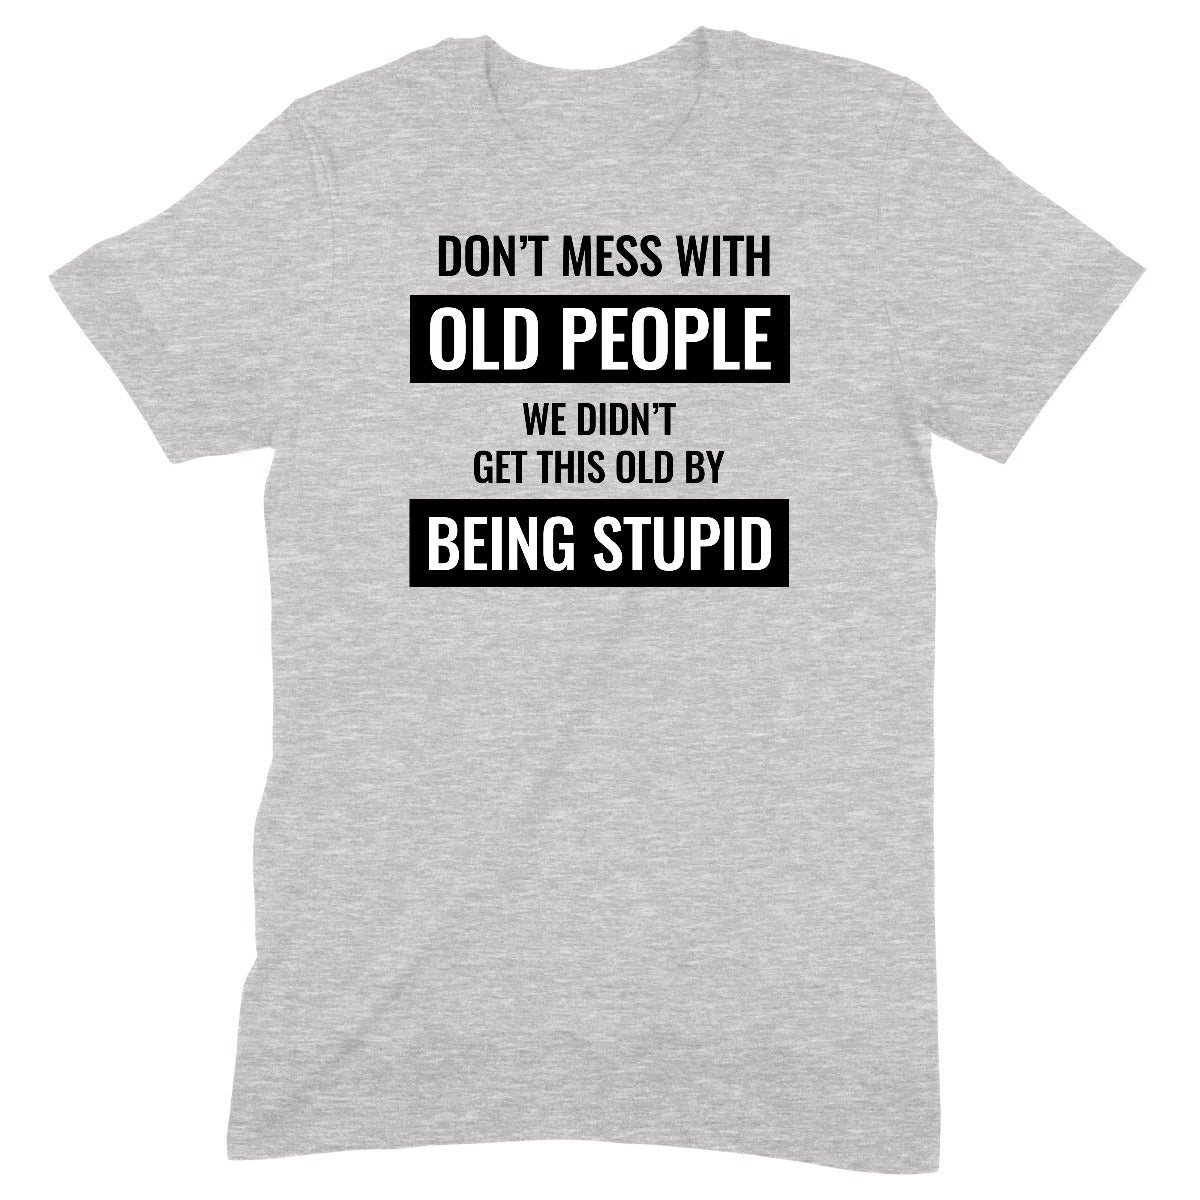 "Don't Mess With Old People " Premium Midweight Ringspun Cotton T-Shirt - Mens/Womens Fits